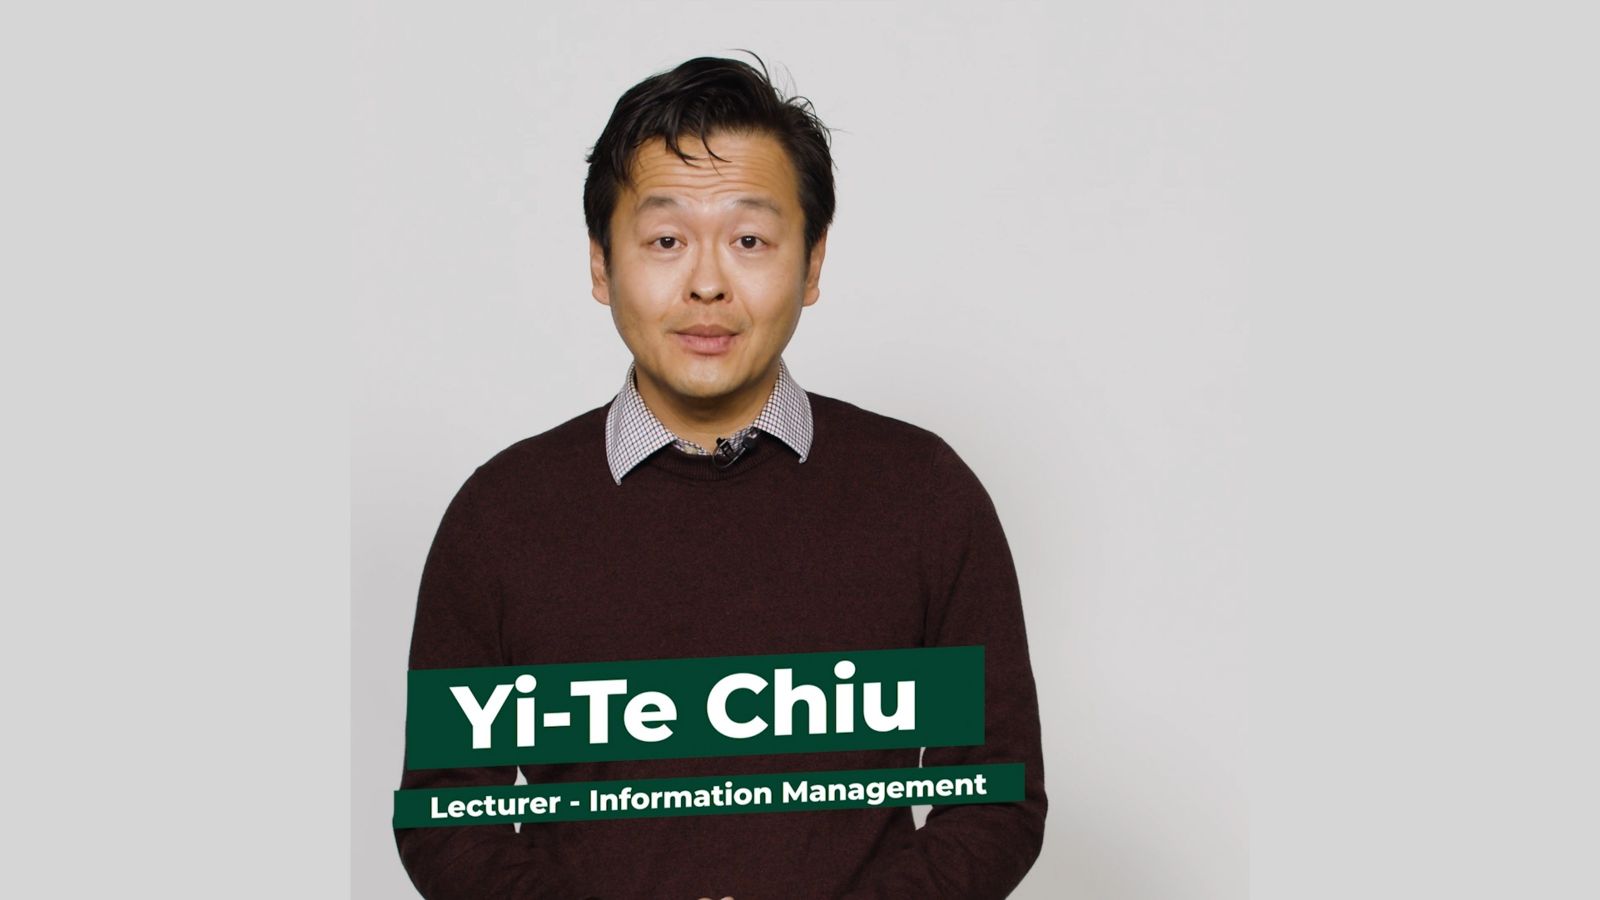 Information management lecturer Yi-Te Chiu stands facing the camera against a white backdrop.